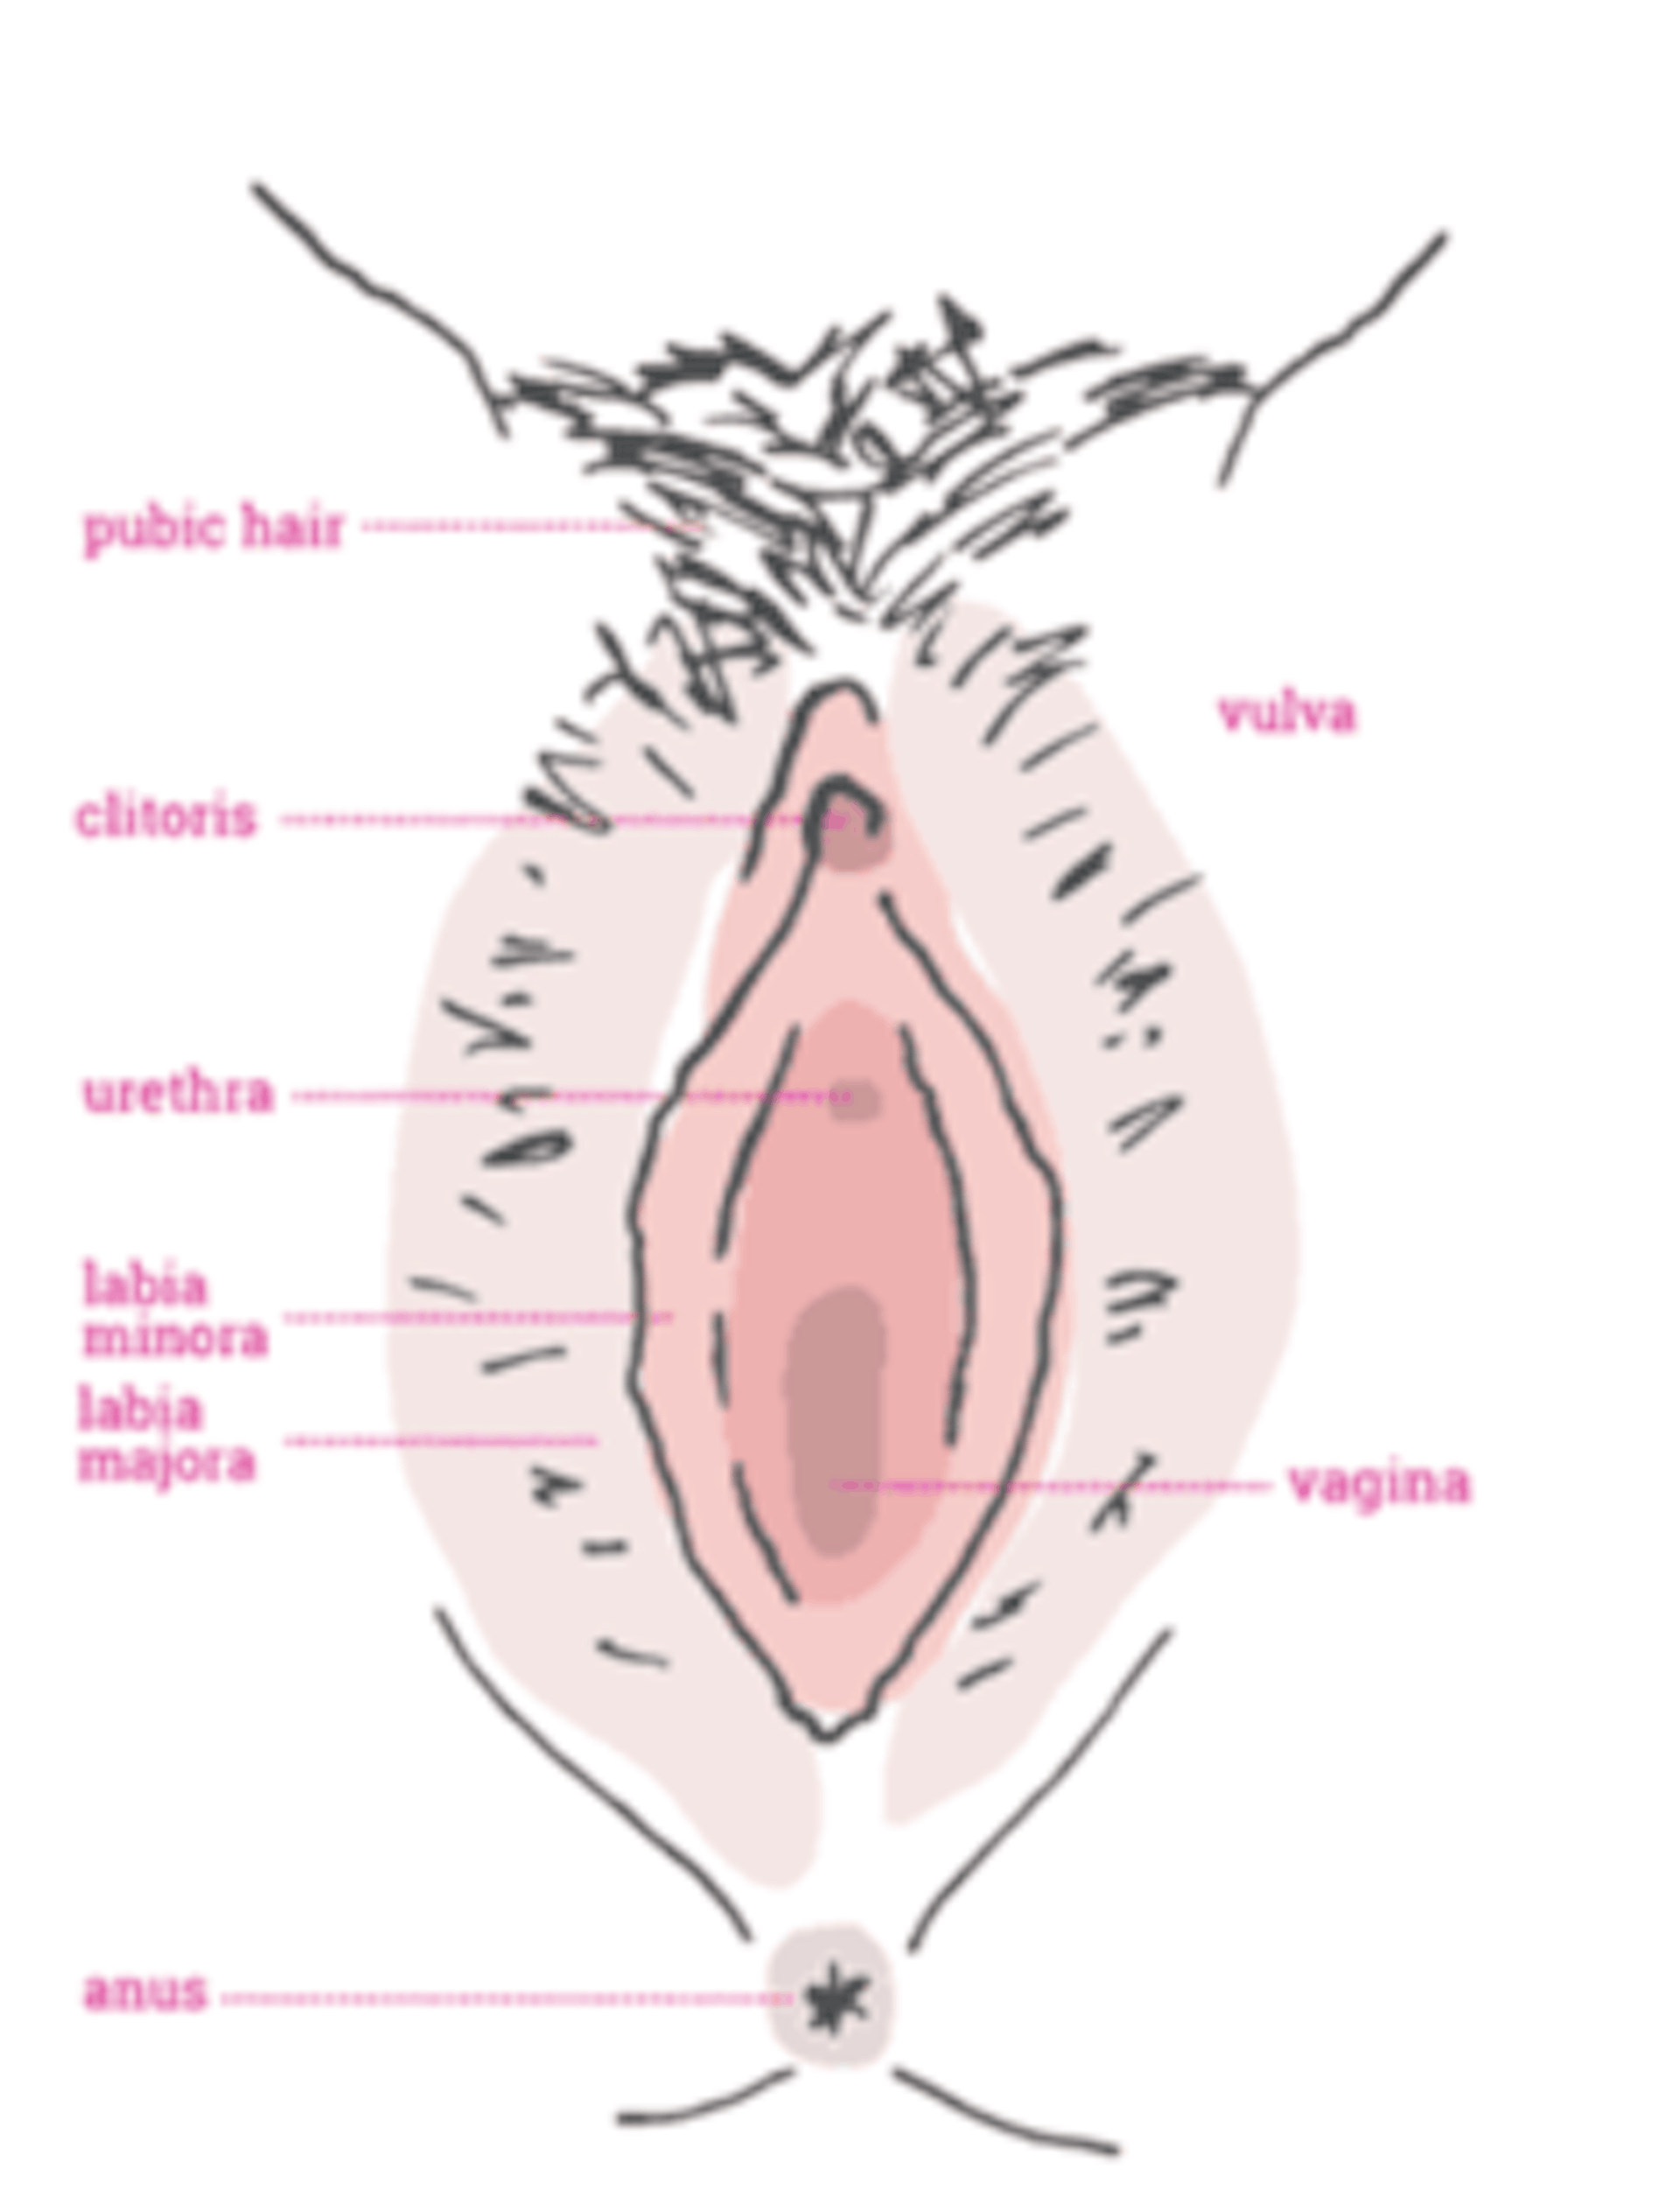 Women dont always get what they want from labiaplasty